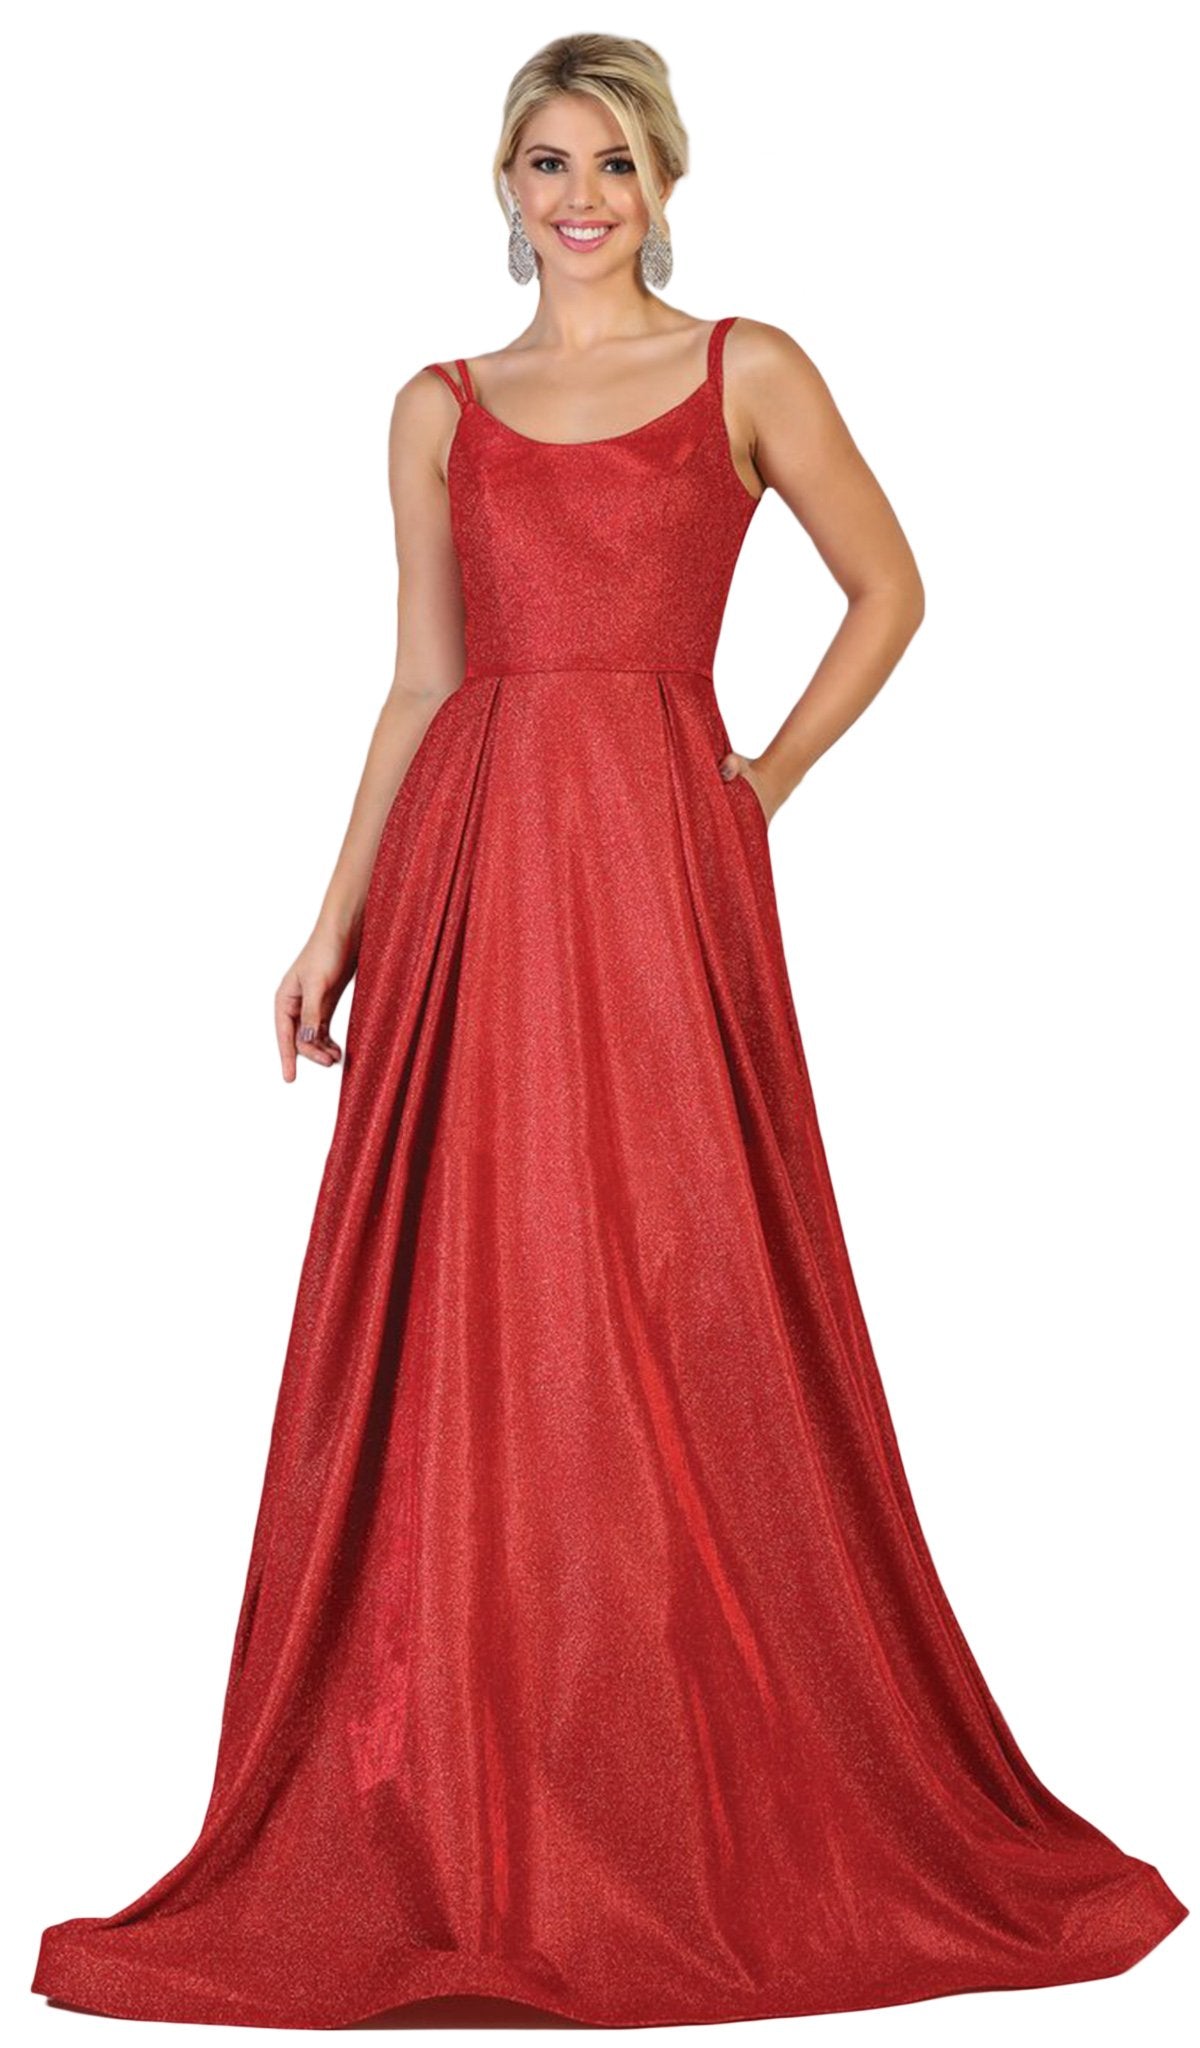 May Queen - RQ7726 Scoop Pleated A-Line Evening Gown In Red and Multi-Color